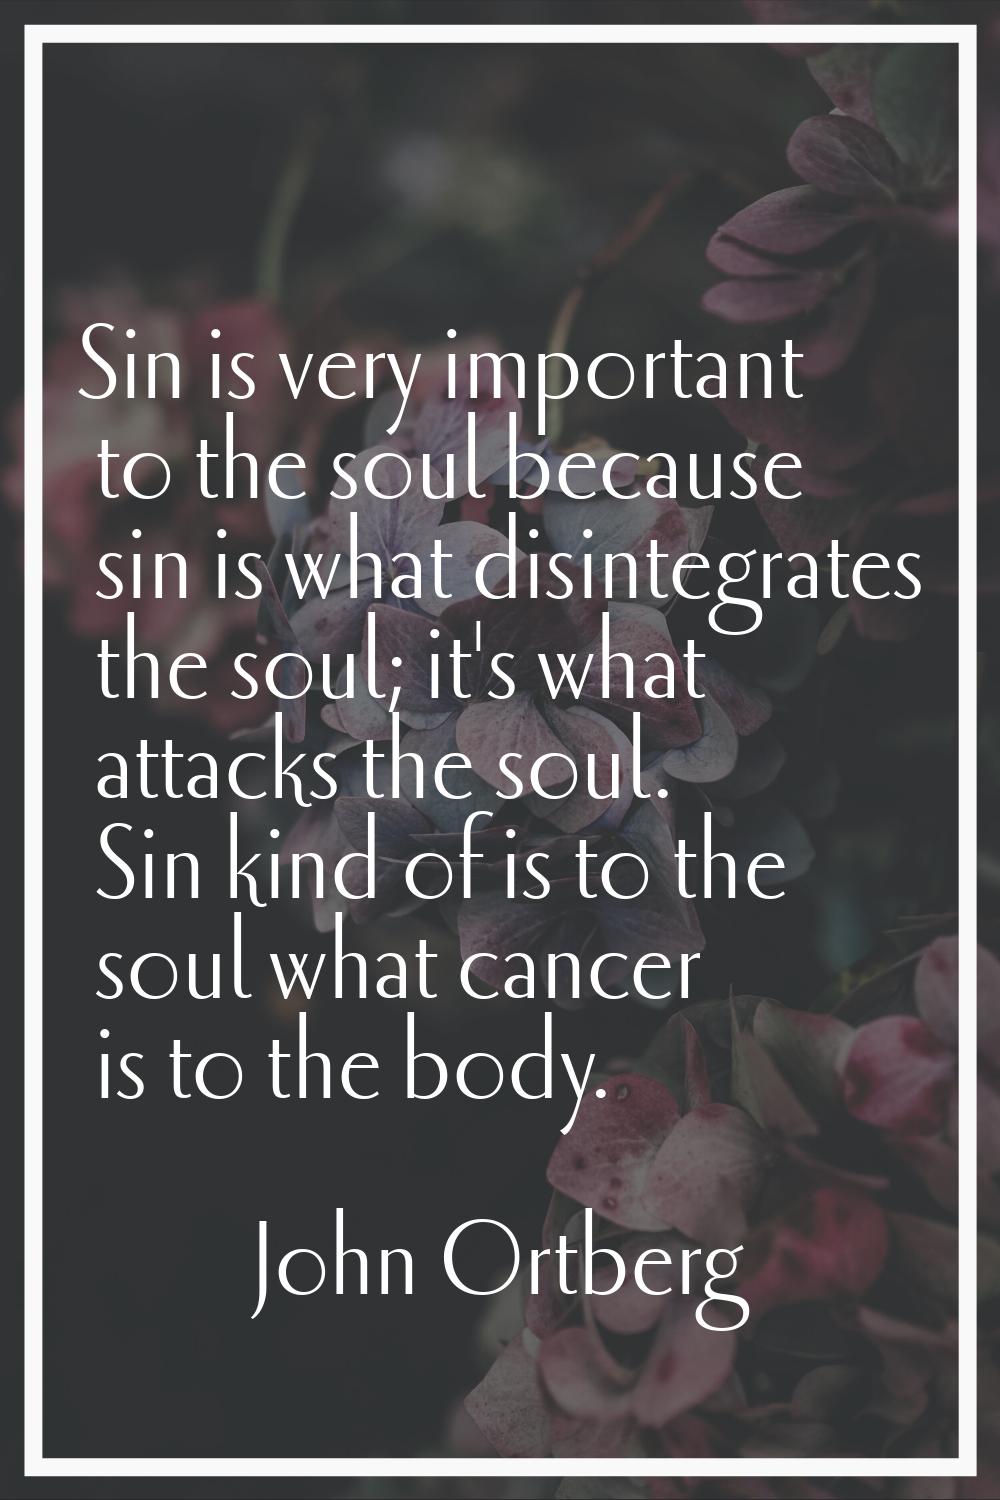 Sin is very important to the soul because sin is what disintegrates the soul; it's what attacks the